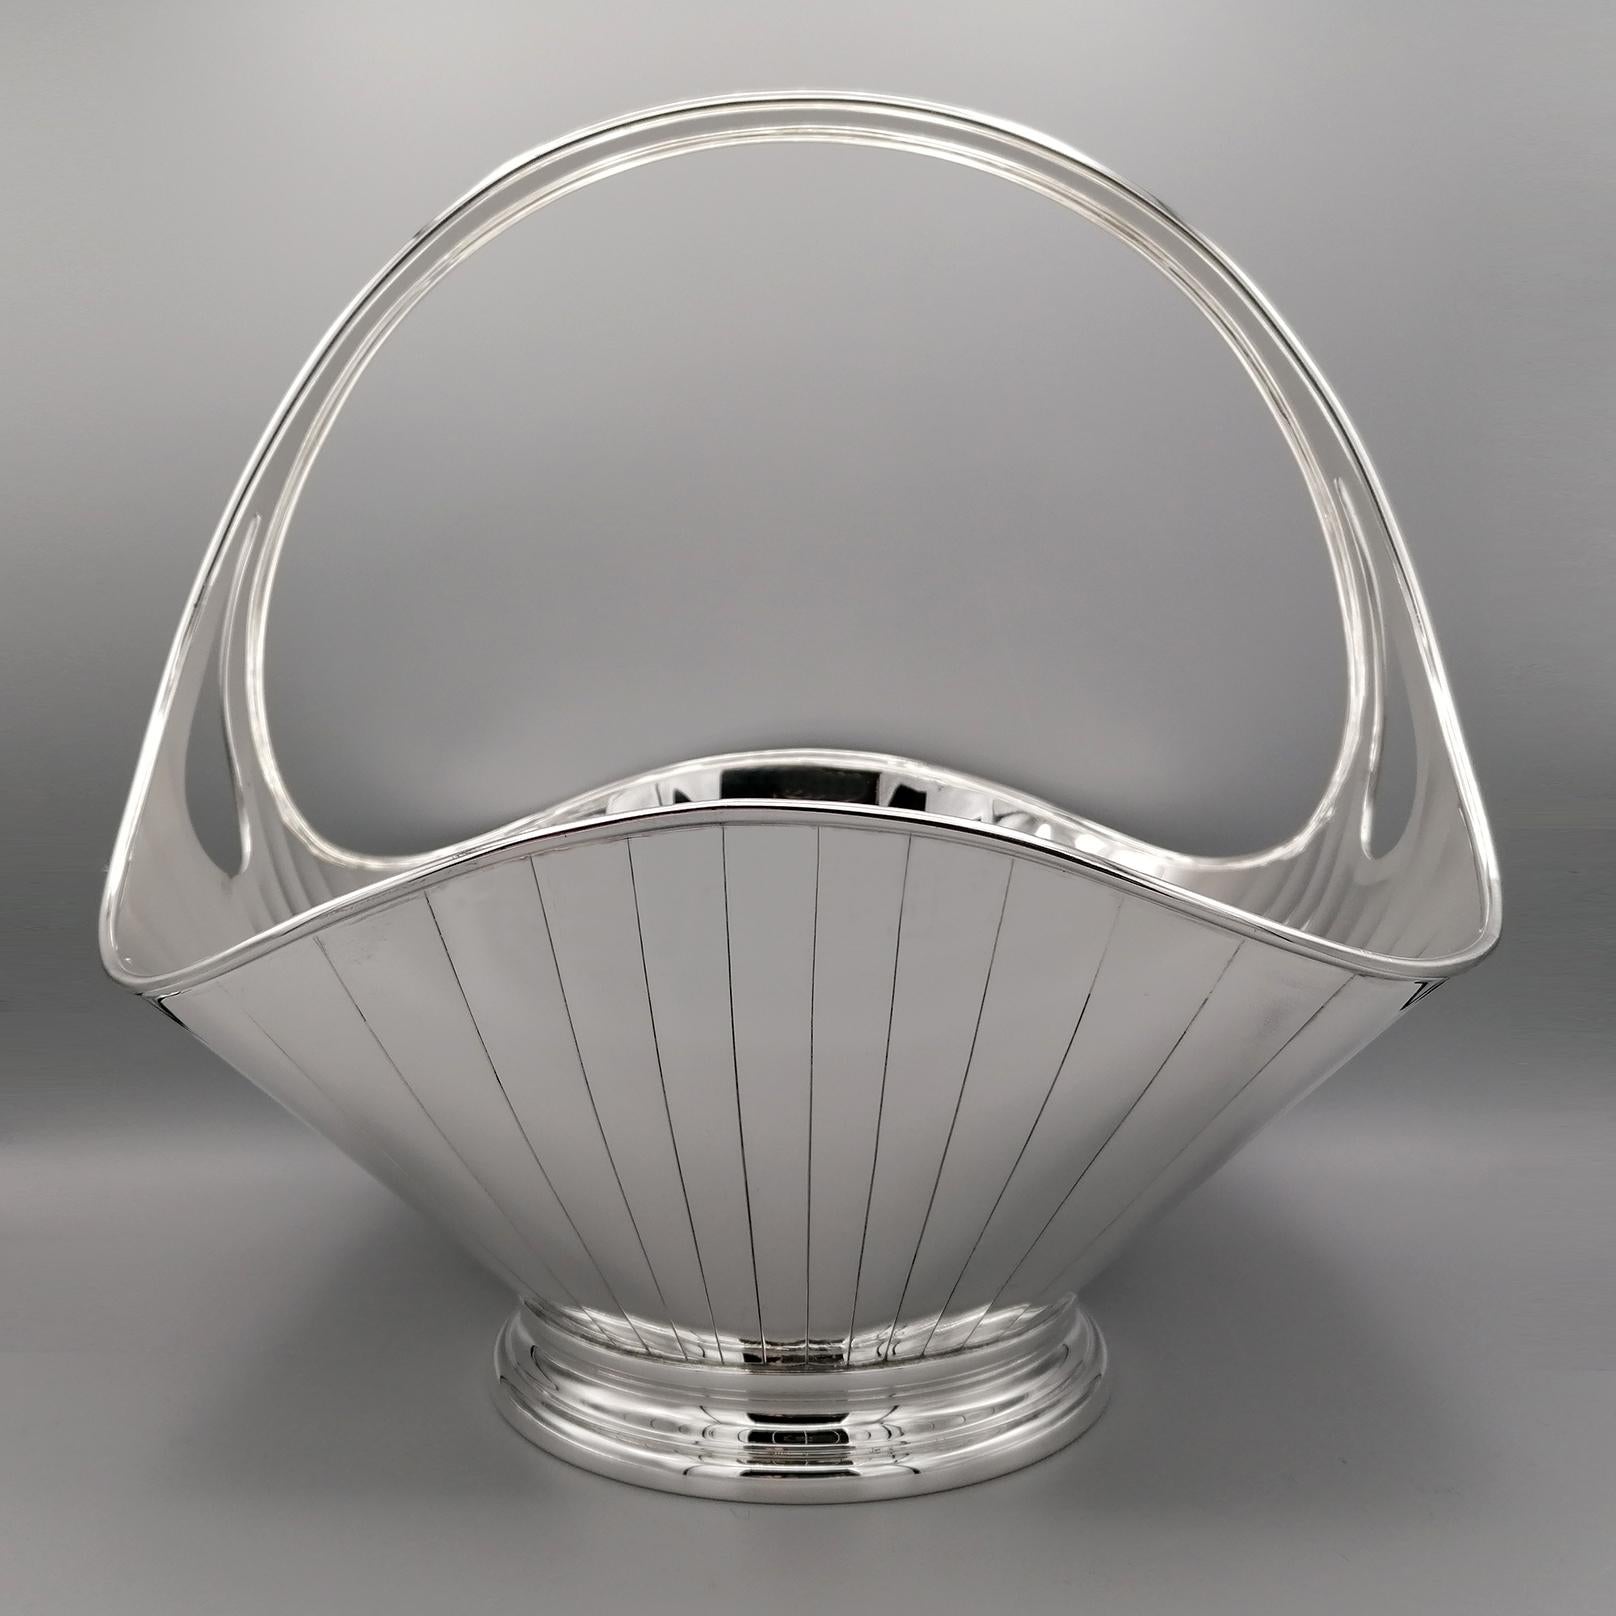 Gorgeous completely handmade sterling silver basket. 
Made from a unique sterling silver sheet, except the base, the basket has been hand molded and turned to give it an elegant and harmonious shape. 
The base is round and shaped with a double step.